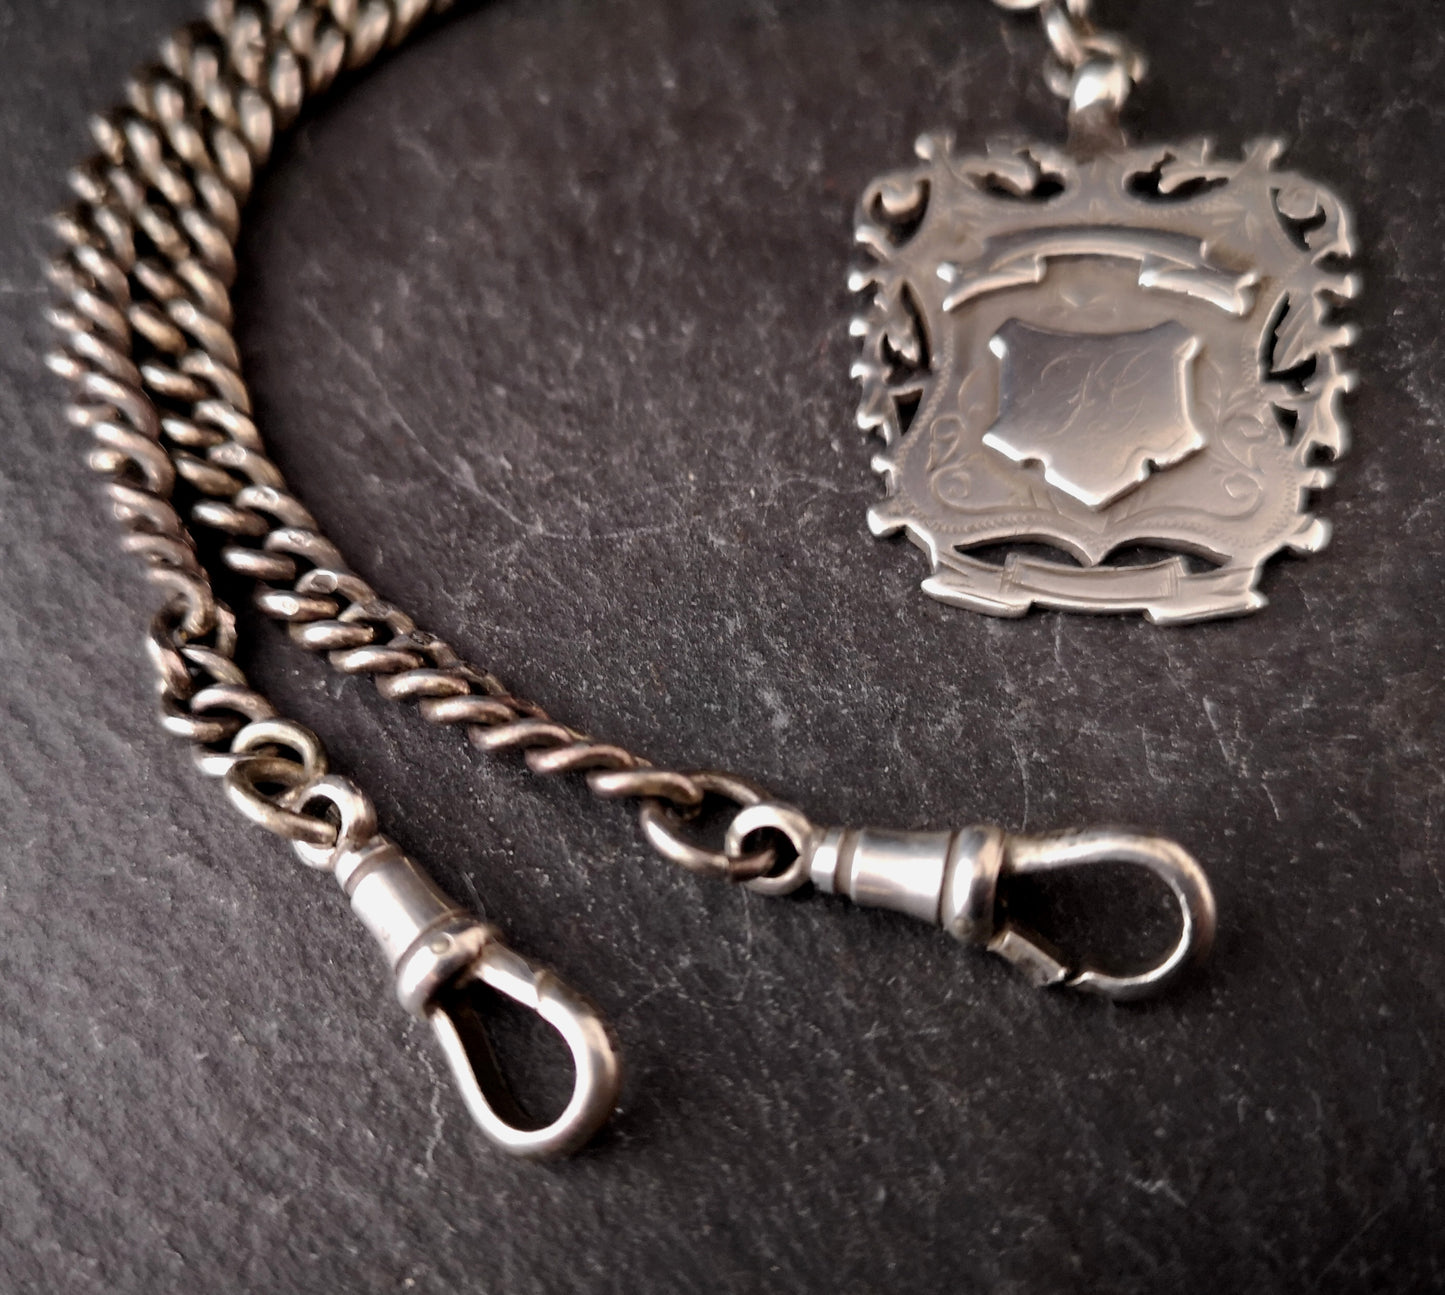 Antique silver Double Albert chain, watch chain, fob